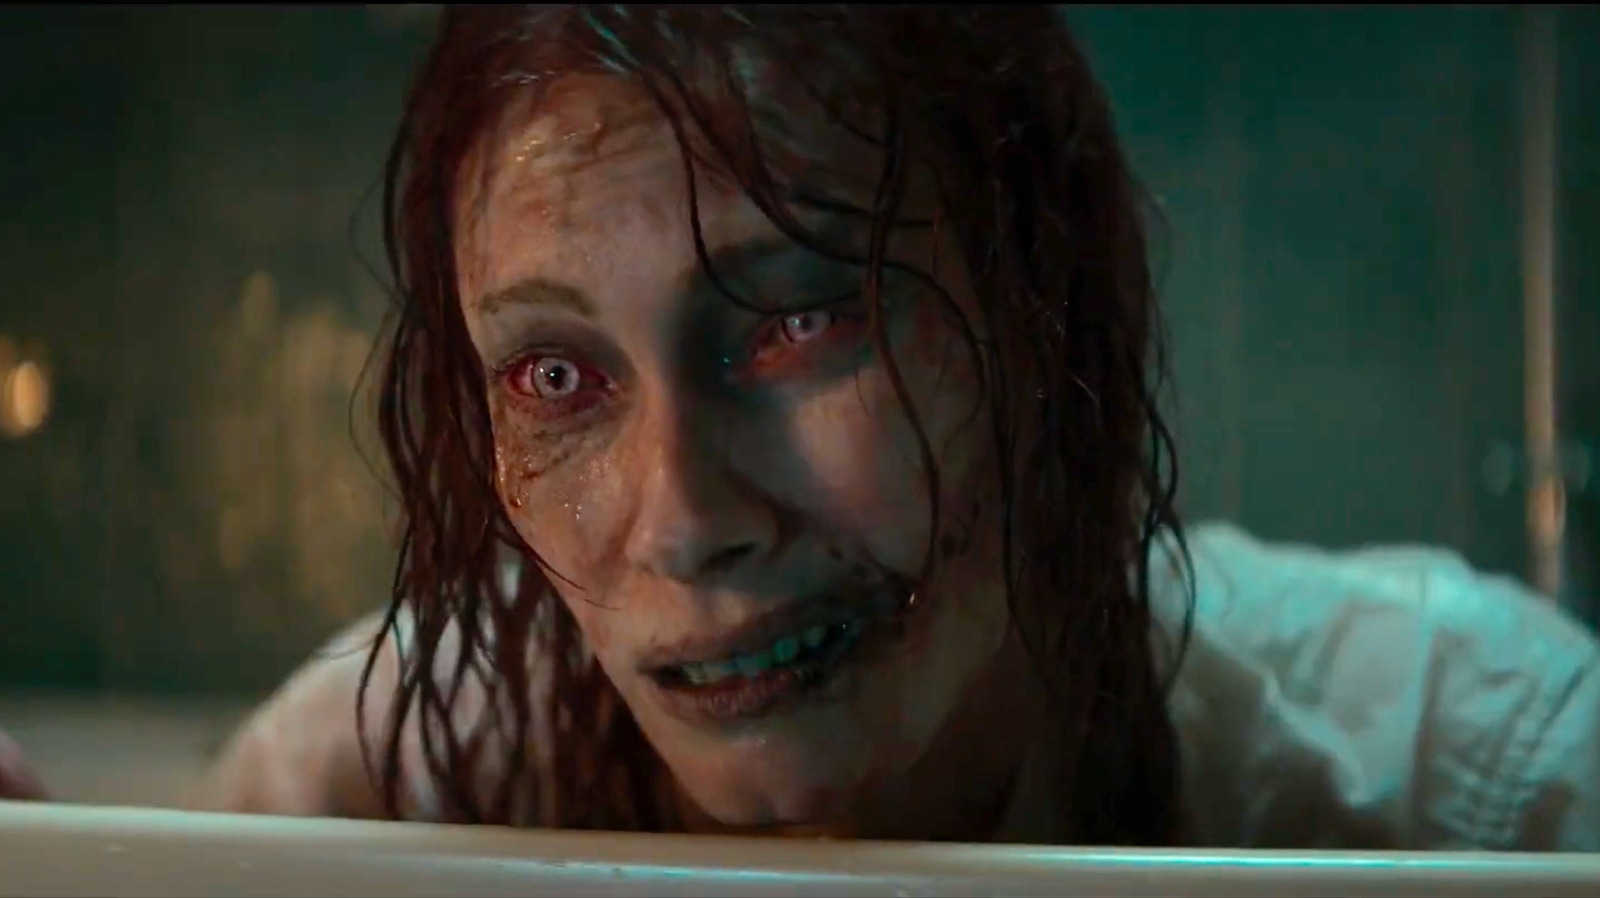 Movie Review - 'Evil Dead' - A Gritty, Gruesome Journey Into Horror History  : NPR